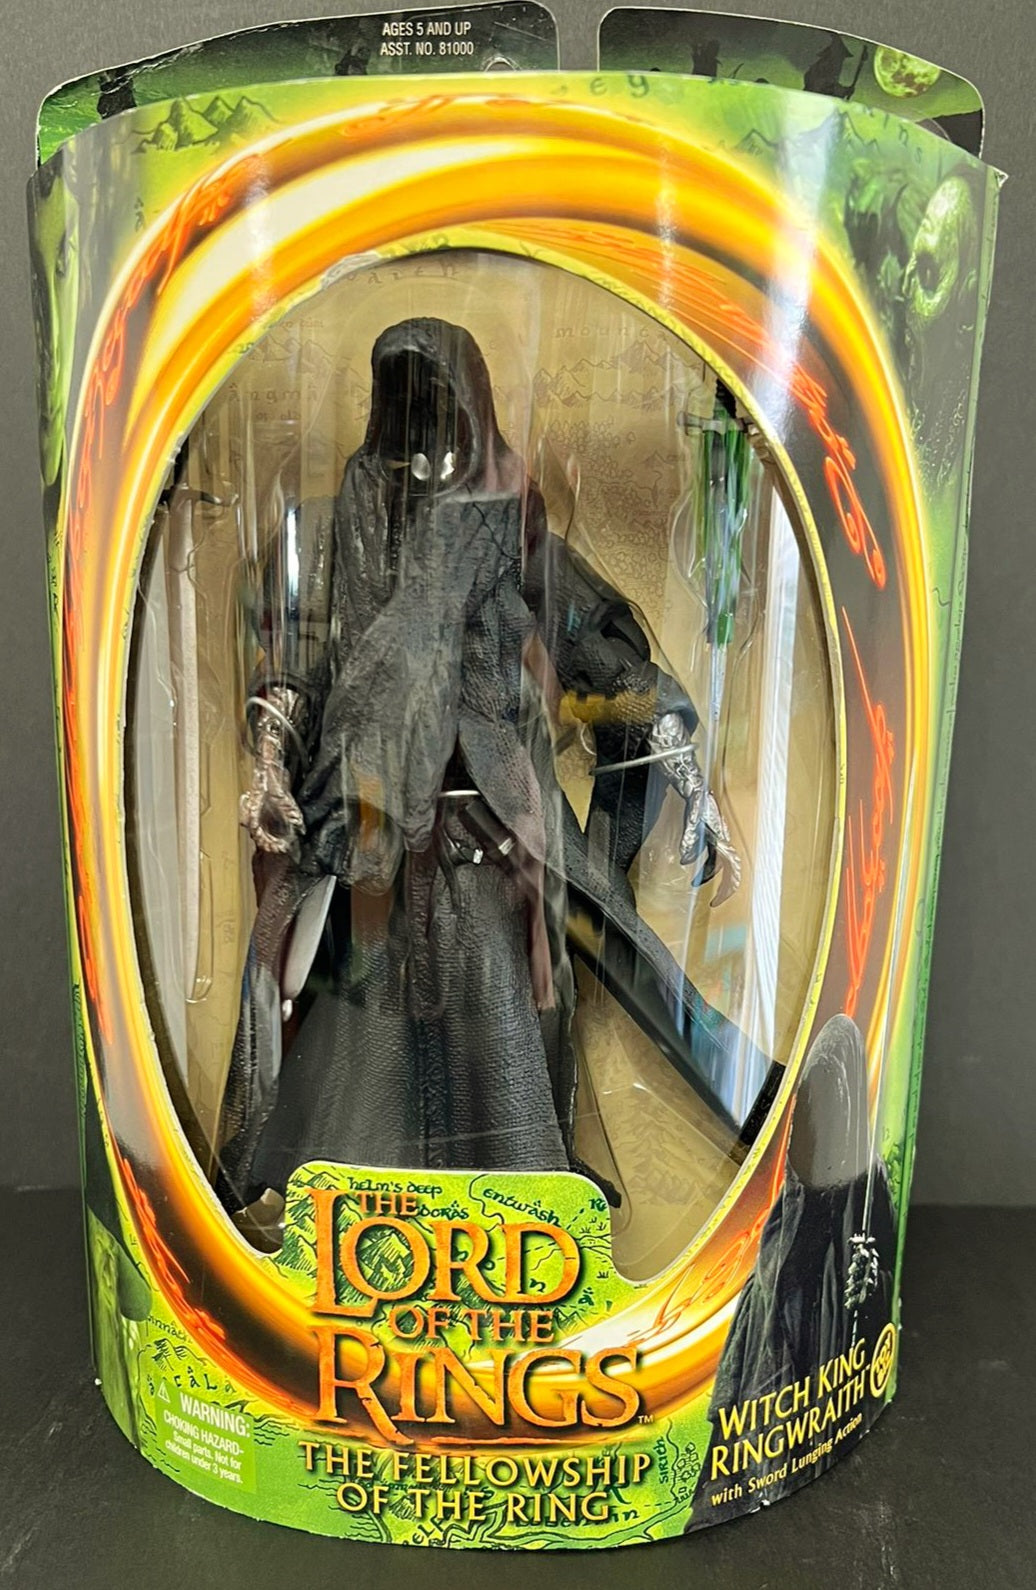 New *LOTR Witch King RingWraith w/ Sword Lunging Action (2001)